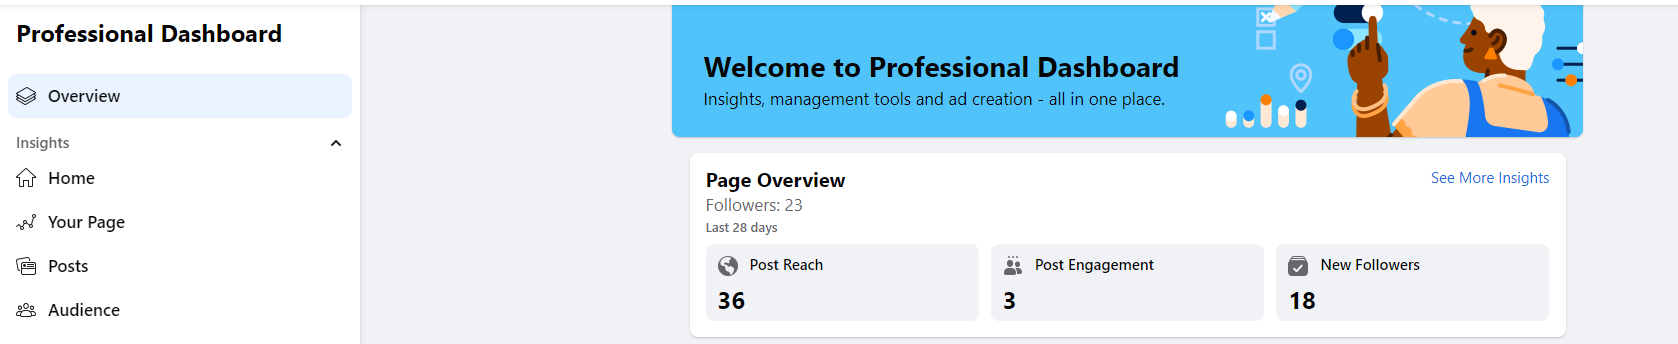 new Facebook page layout and design - Facebook professional dashboard